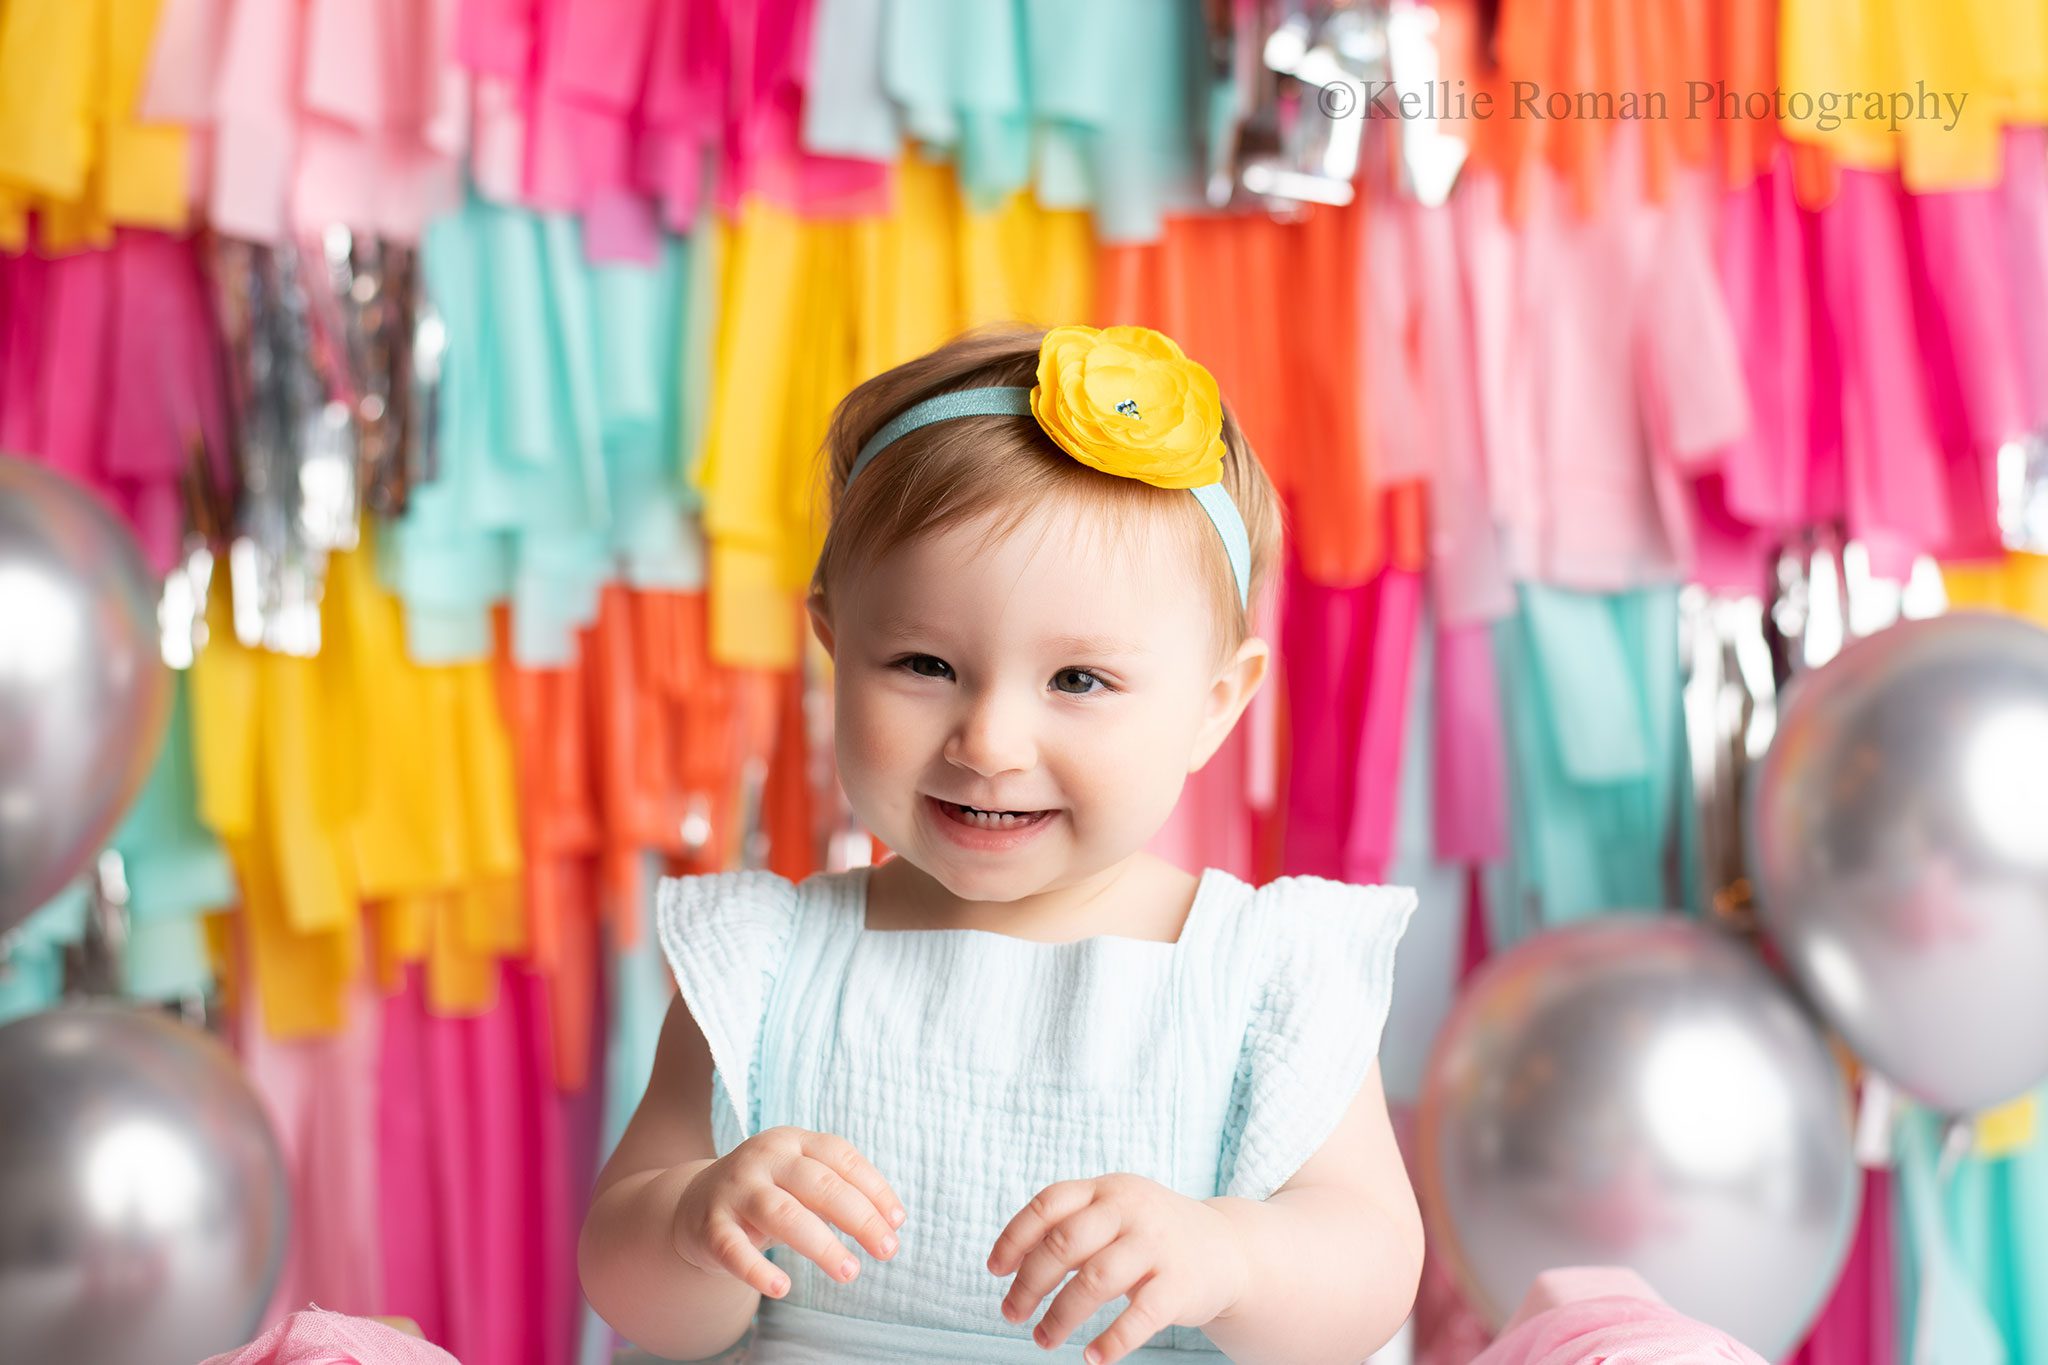 one year old is smiling showing her teeth. she has light blue romper and matching headband on. the backdrop is very bright with lots of colors. blue pinks, oranges, yellows, and silvers.
